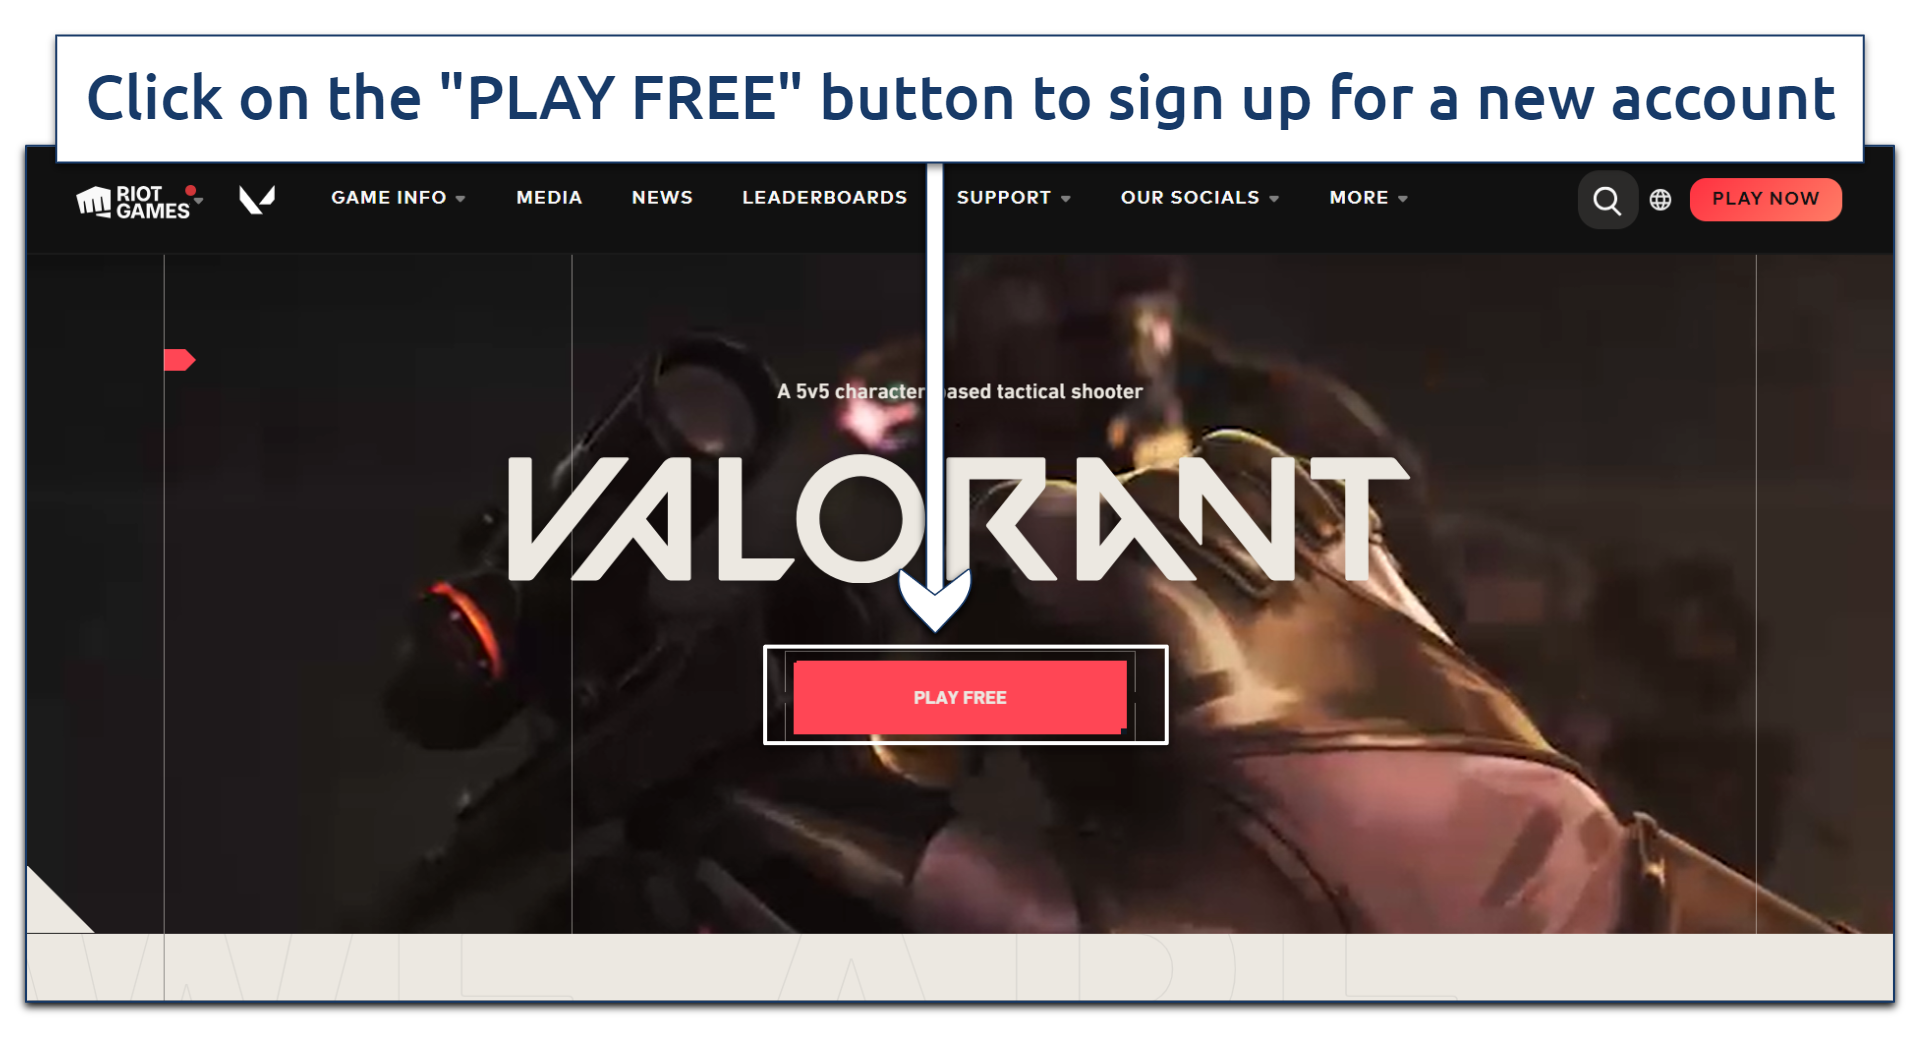 A screenshot showing the PLAY FREE button on Valorant's website